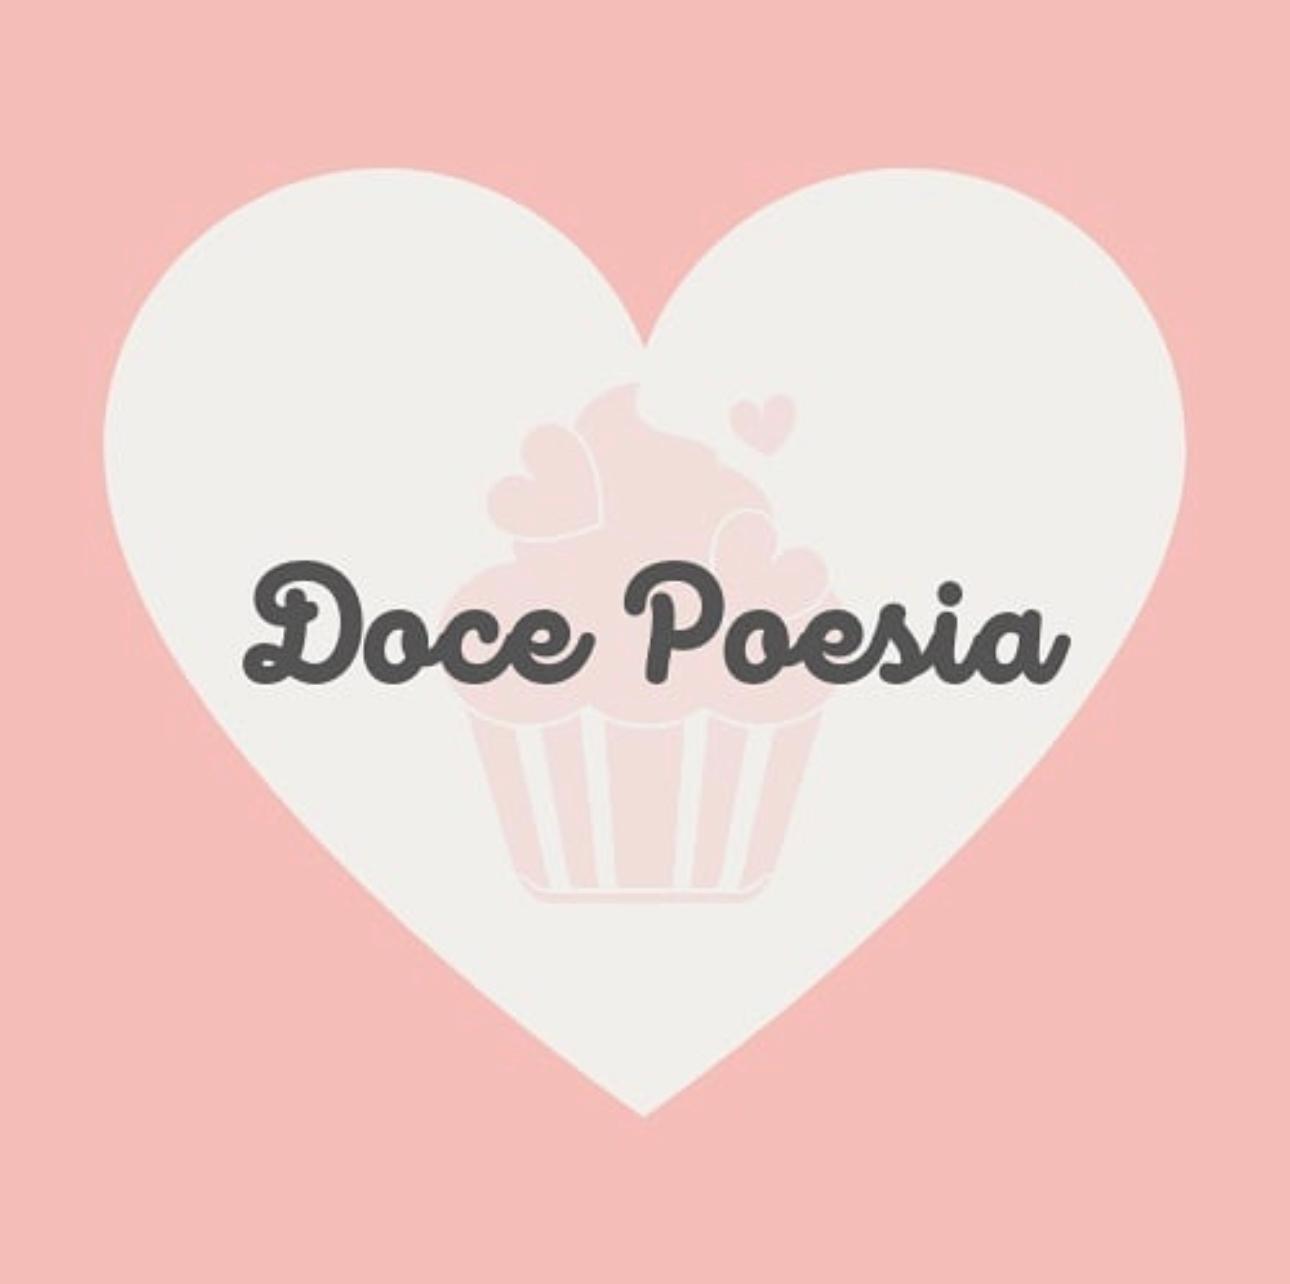 Doce Poesia